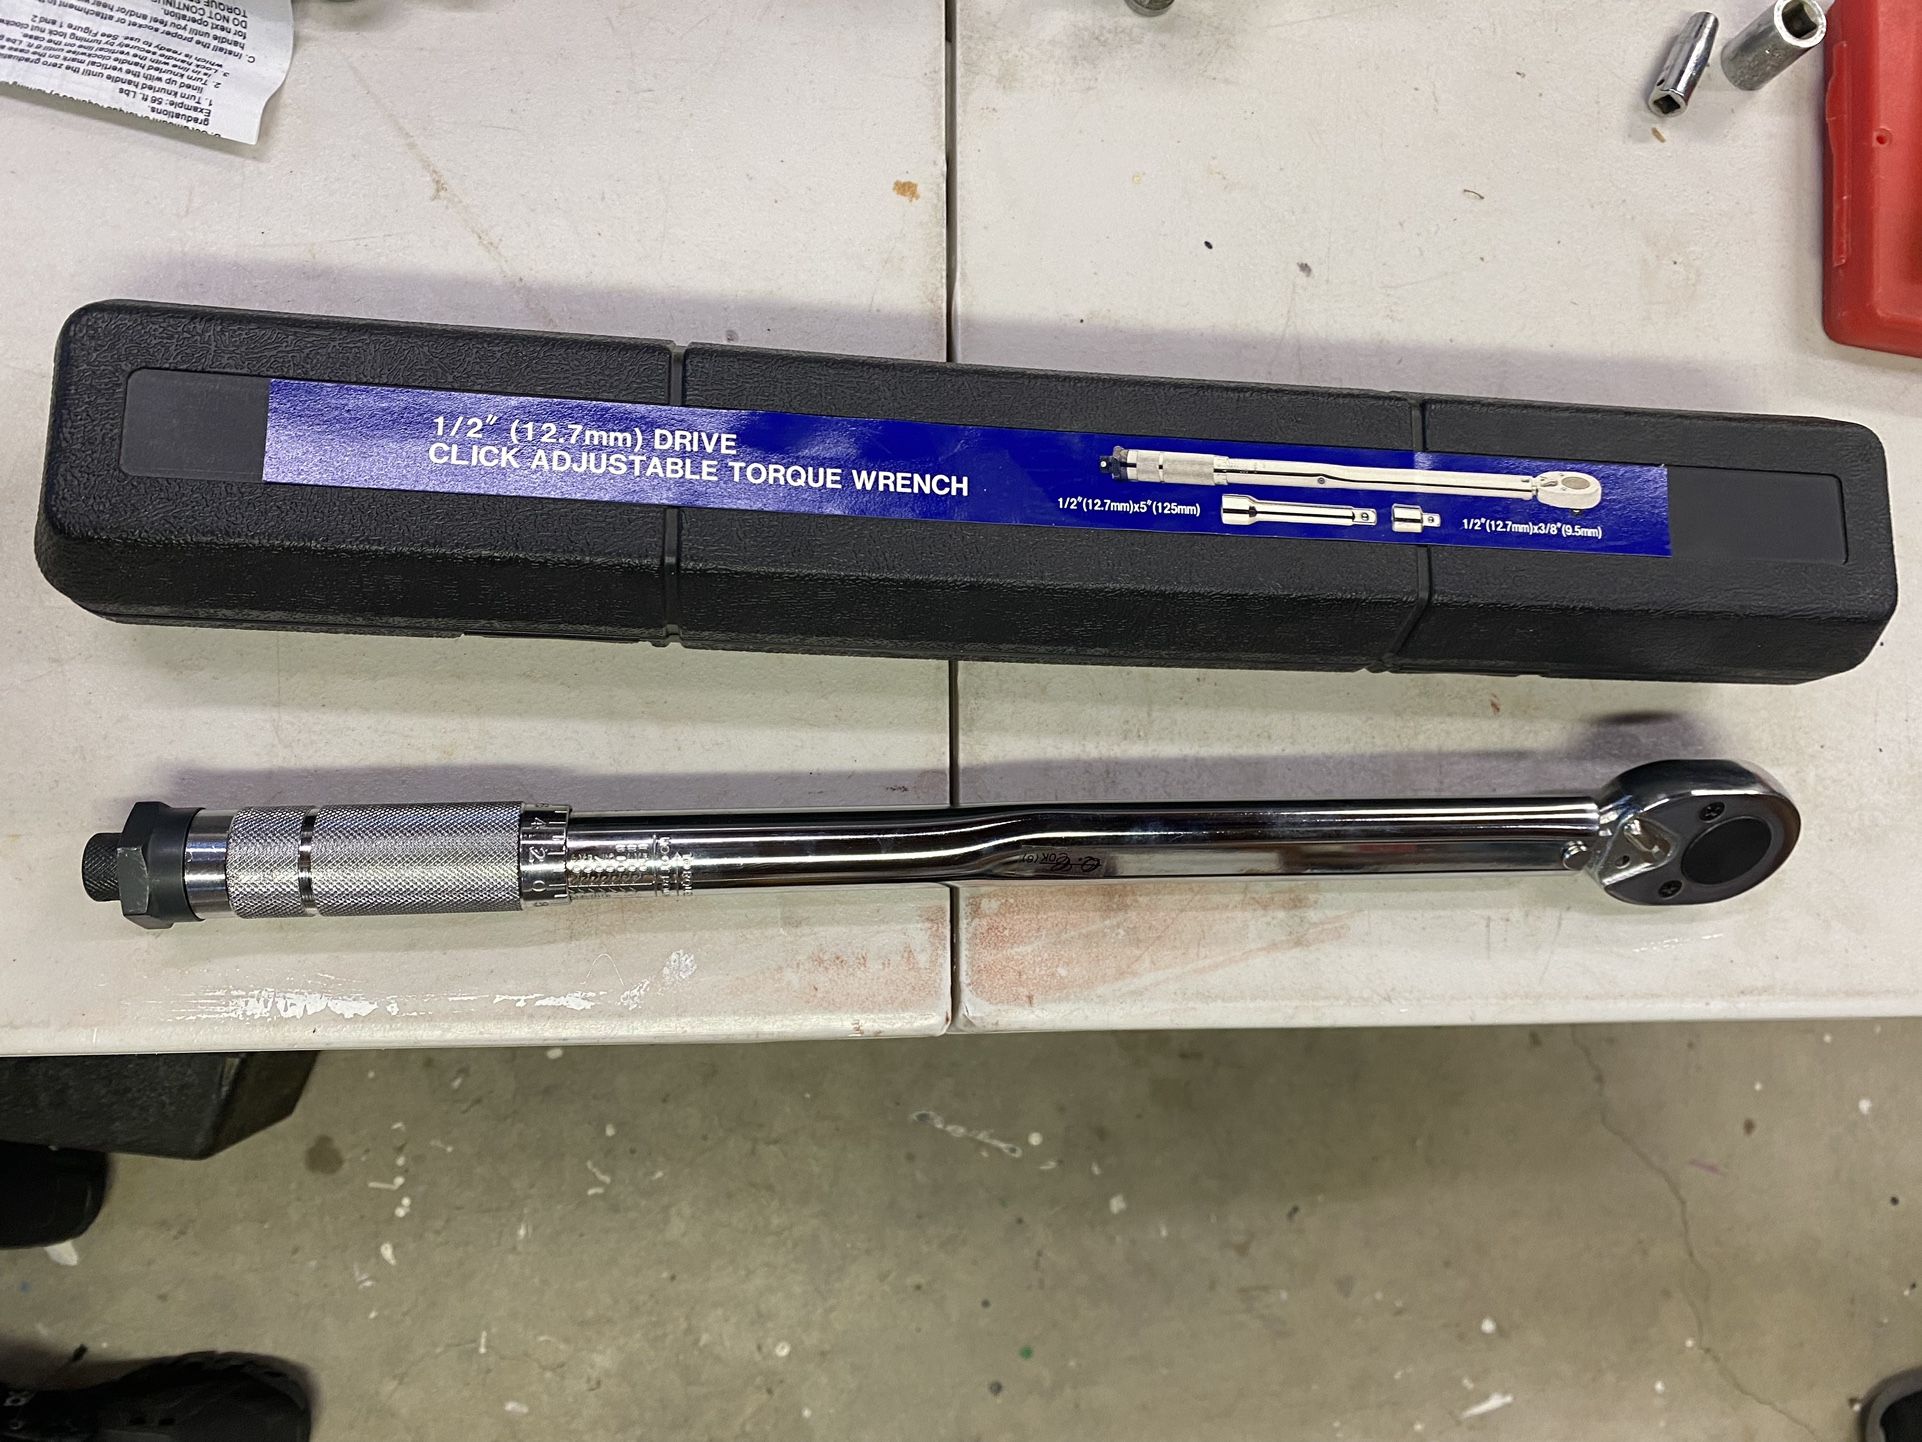 1/2” Drive Click Adjustable Torque Wrench